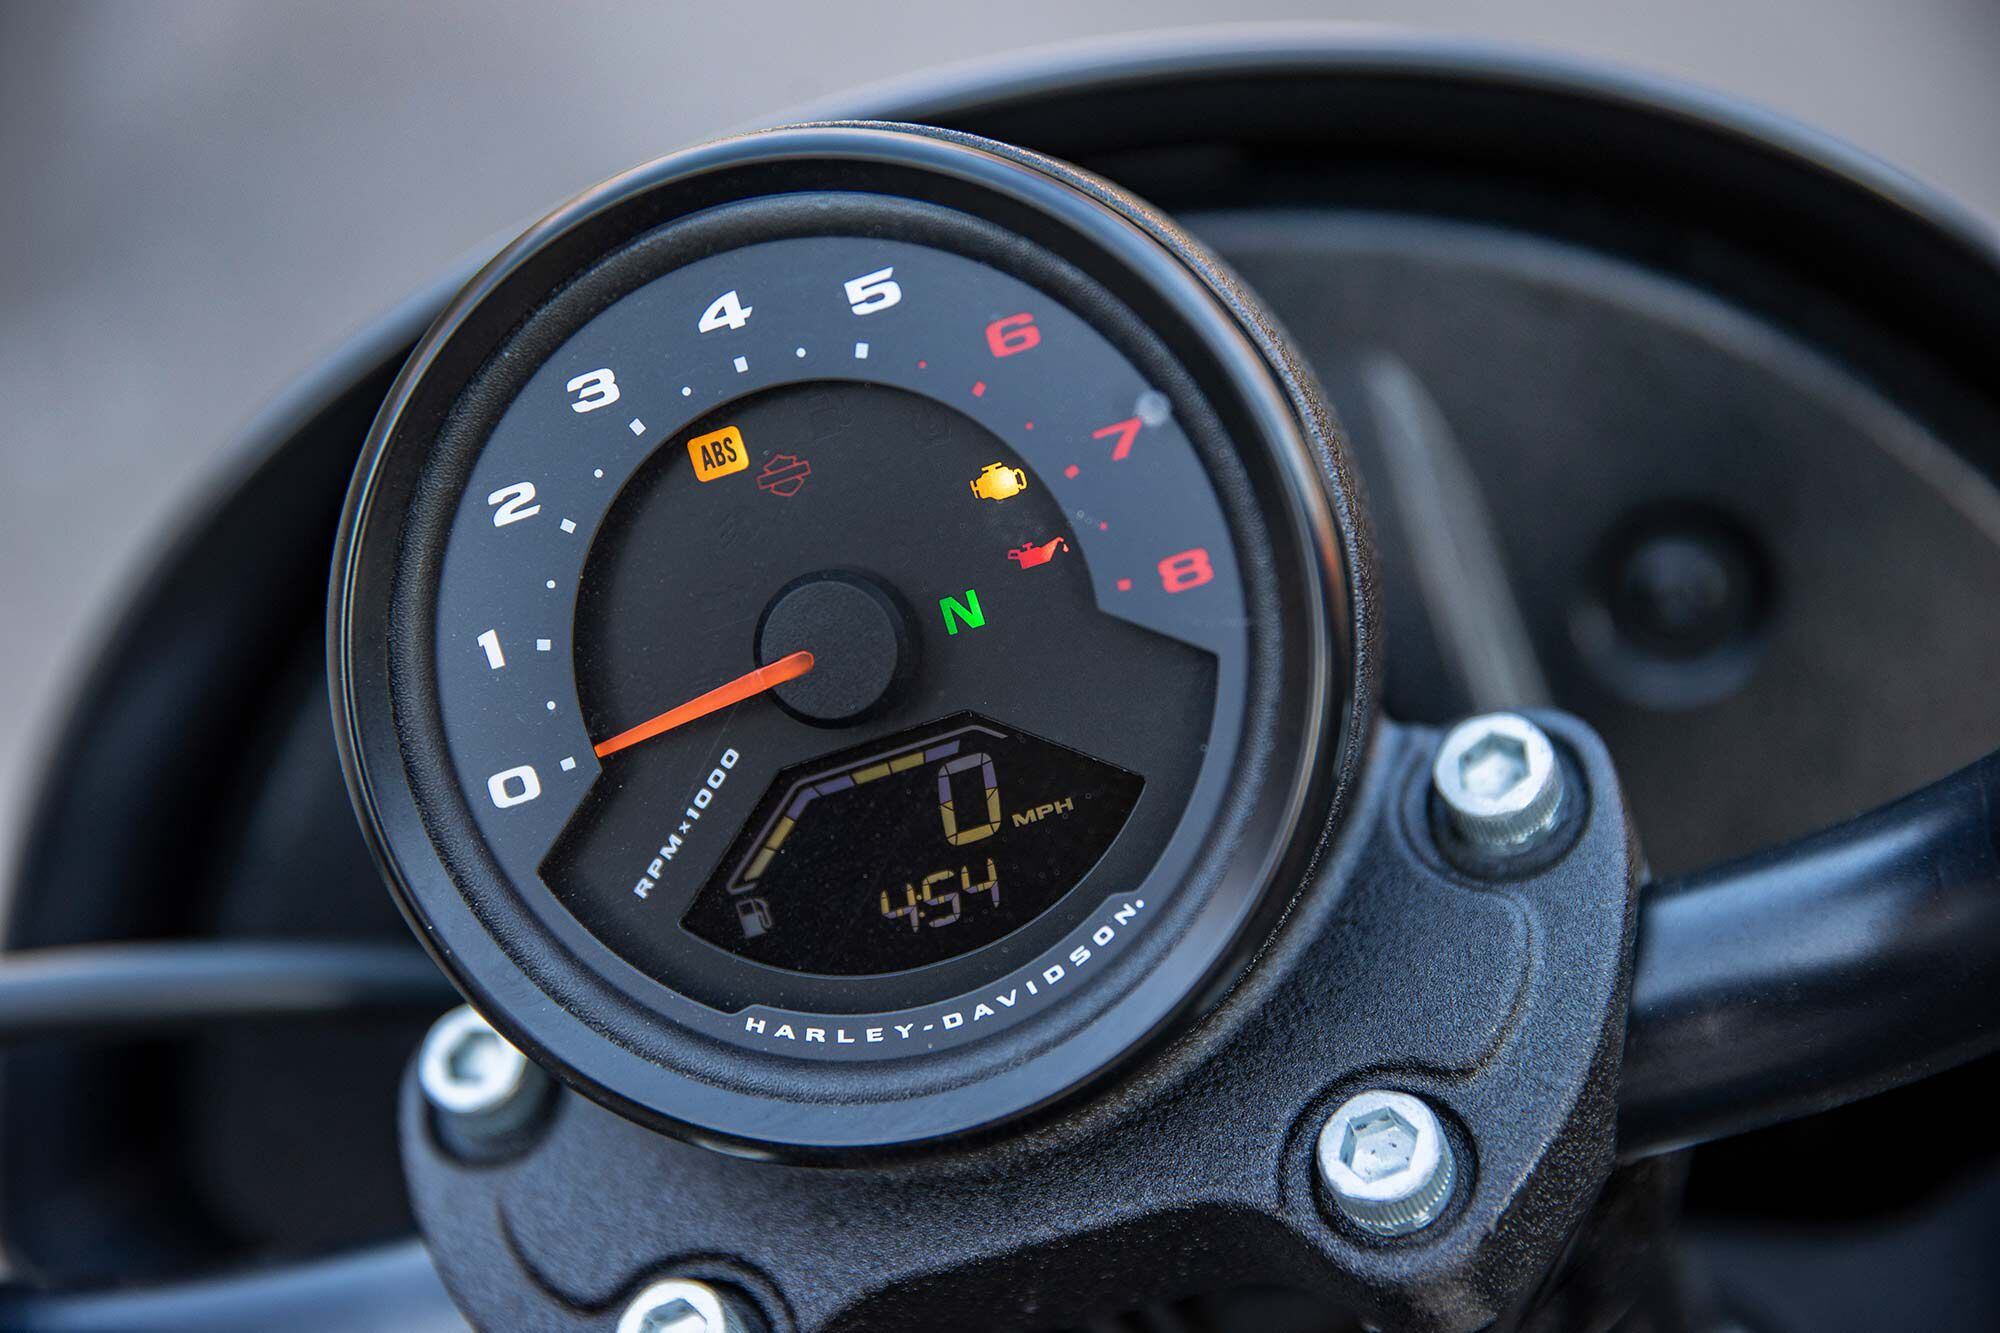 This Low Rider S is premium and has some of the best equipment H-D has to offer, but the gauge right in the rider’s sight line is still the same old analog unit that’s been used for years.